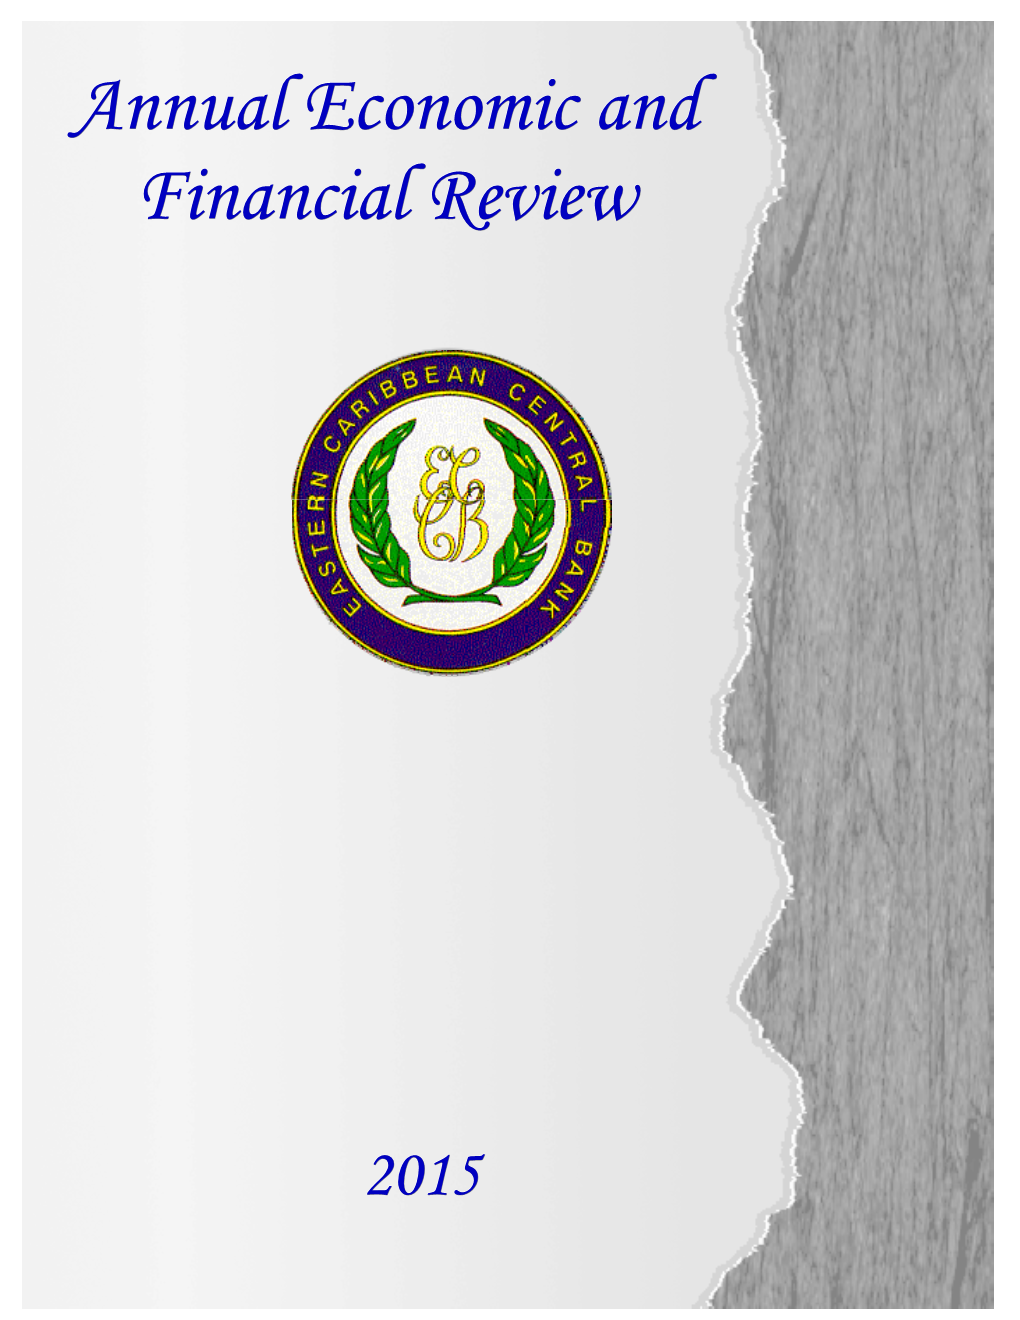 Annual Economic and Financial Review